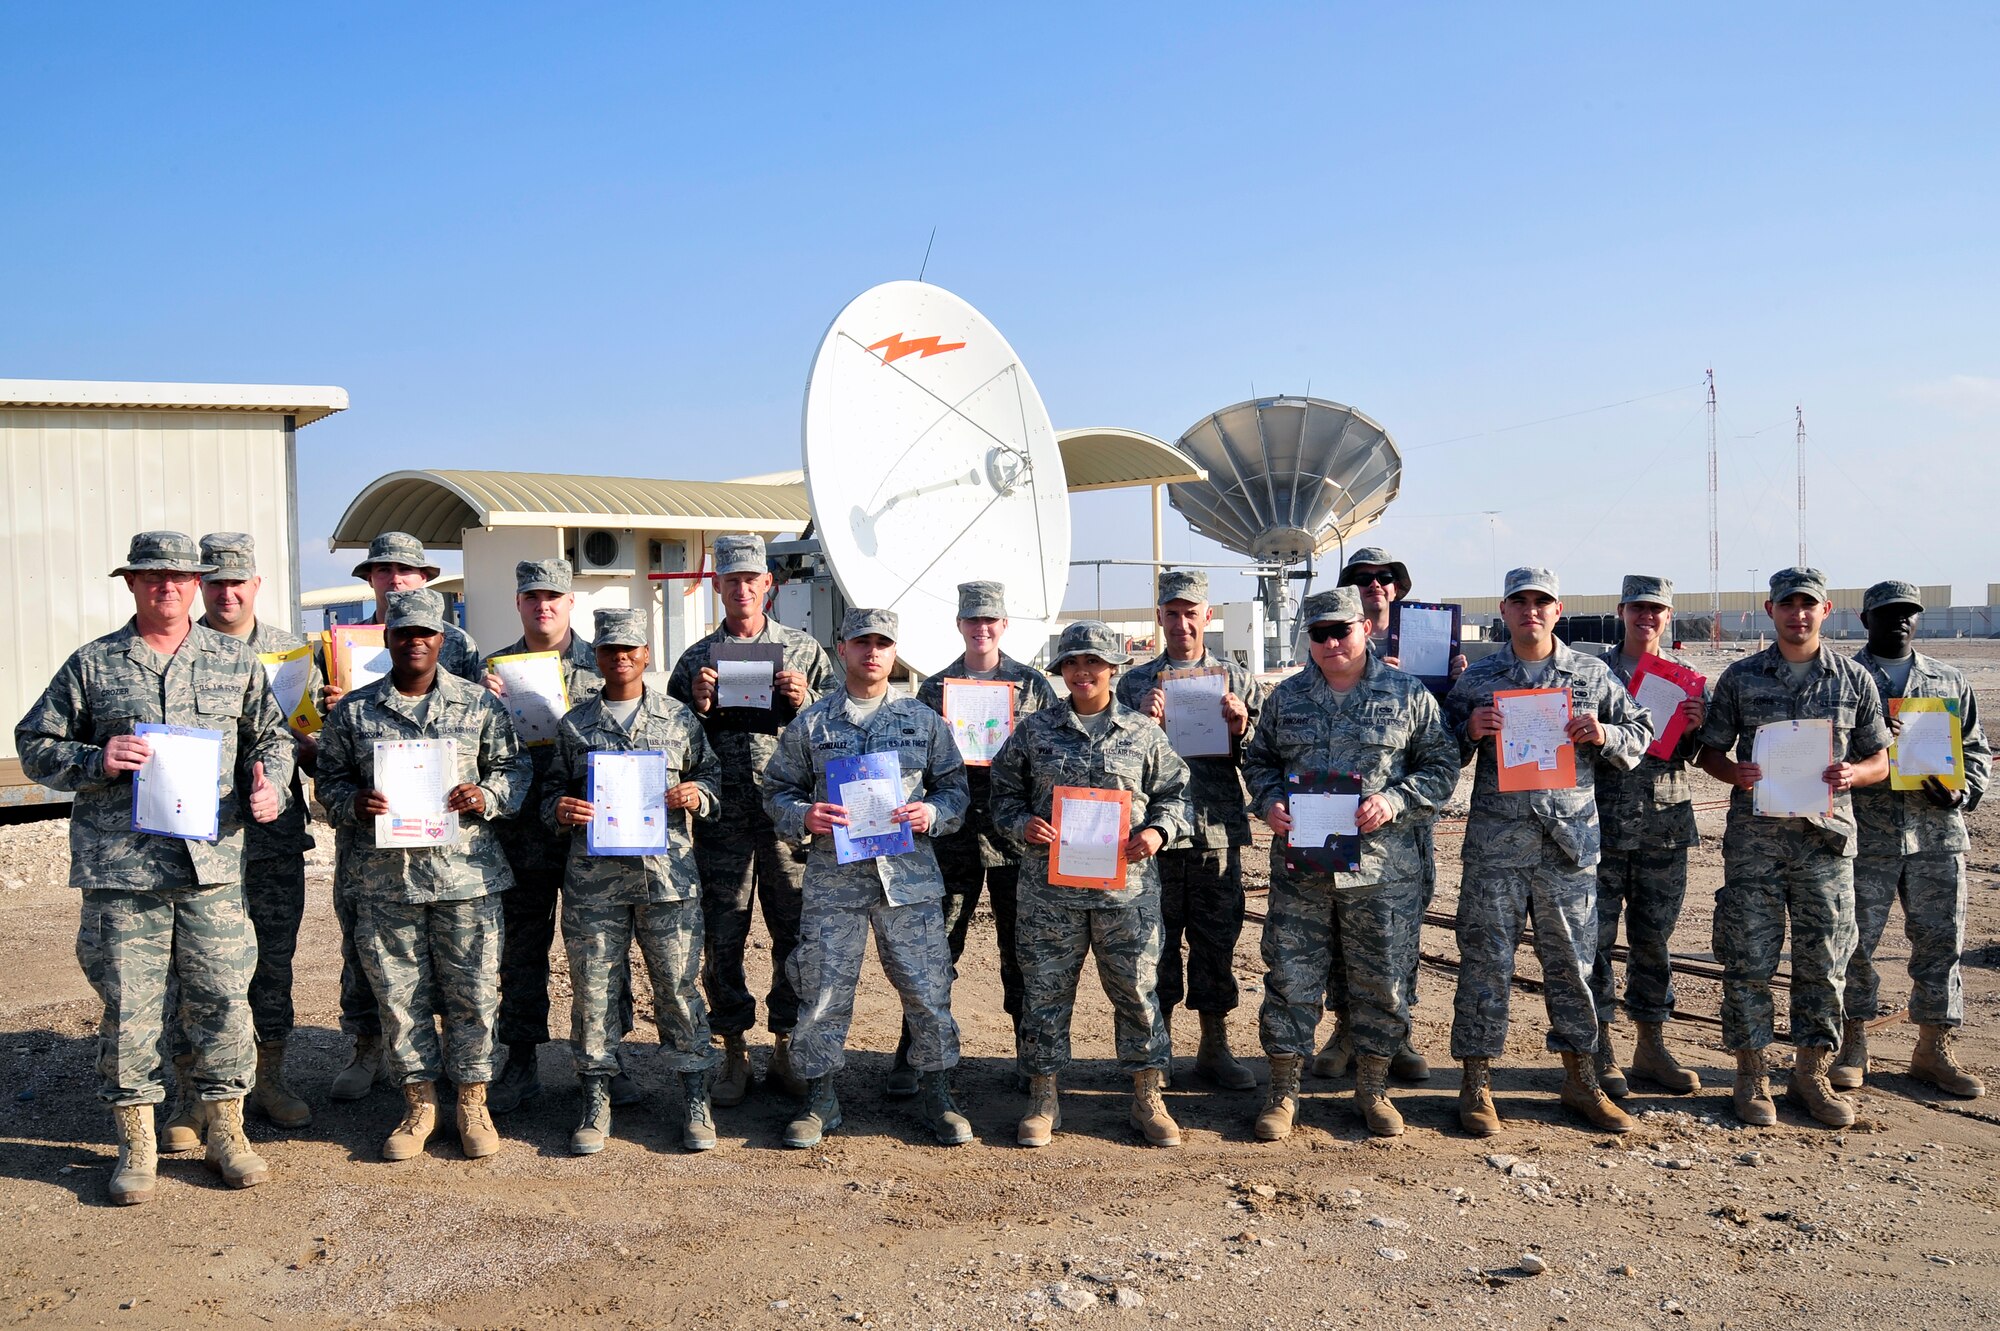 SOUTHWEST ASIA - Airmen from the 380th Expeditionary Communications Squadron hold letters received from U.S. elementary school children Dec. 14, 2009. The 380th ECS Airmen wrote a response to each of the children's letters, answering their questions and to let them know the letters were received by deployed servicemembers. (U.S. Air Force photo/Tech. Sgt. Charles Larkin Sr)